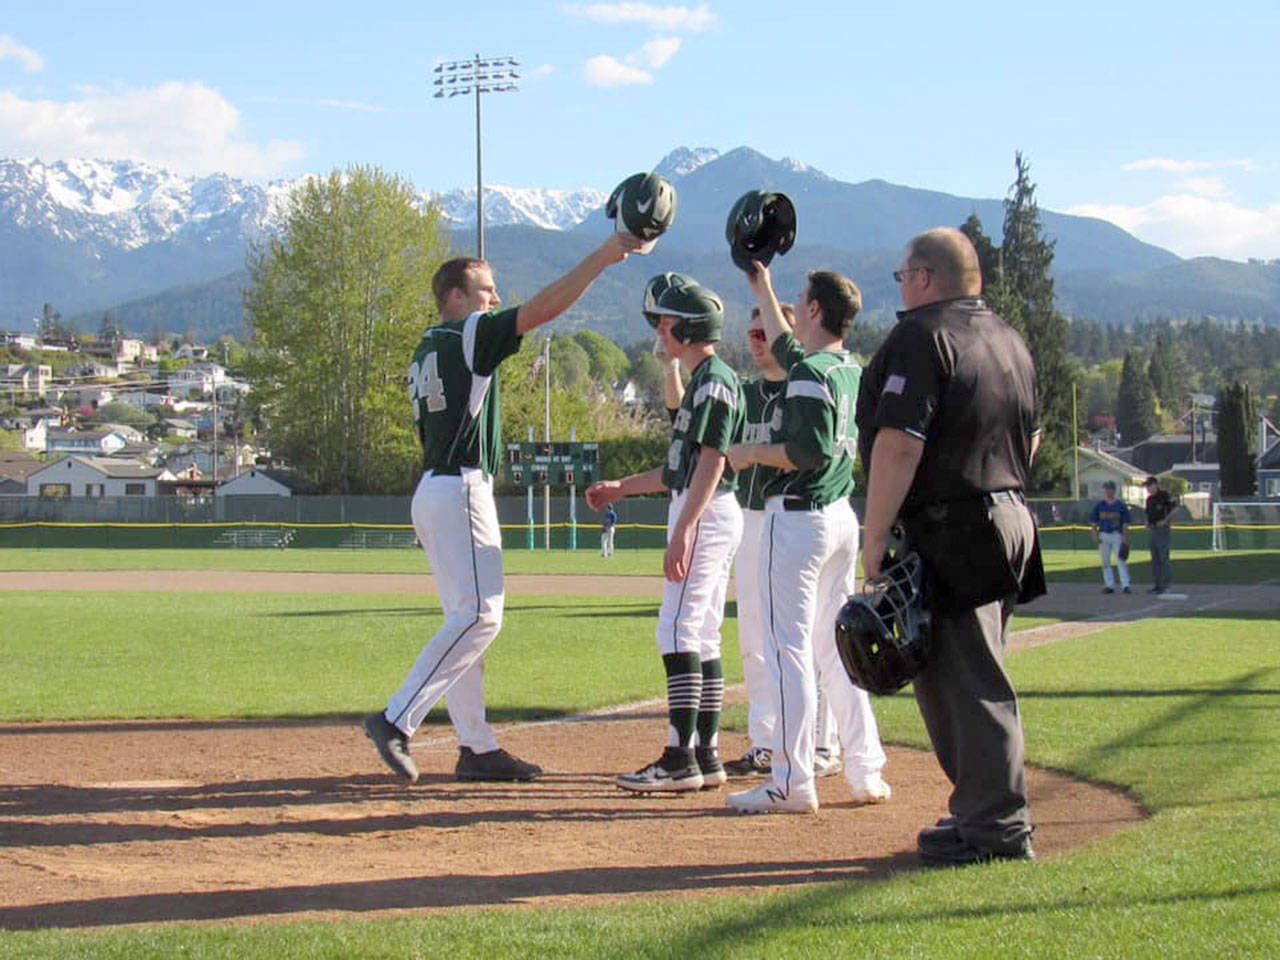 Port Angeles’ Lucas Jarnagin is congratulated at home plate by teammates after hitting the second of two home runs against Bremerton during a 2019 contest at Civic Field.